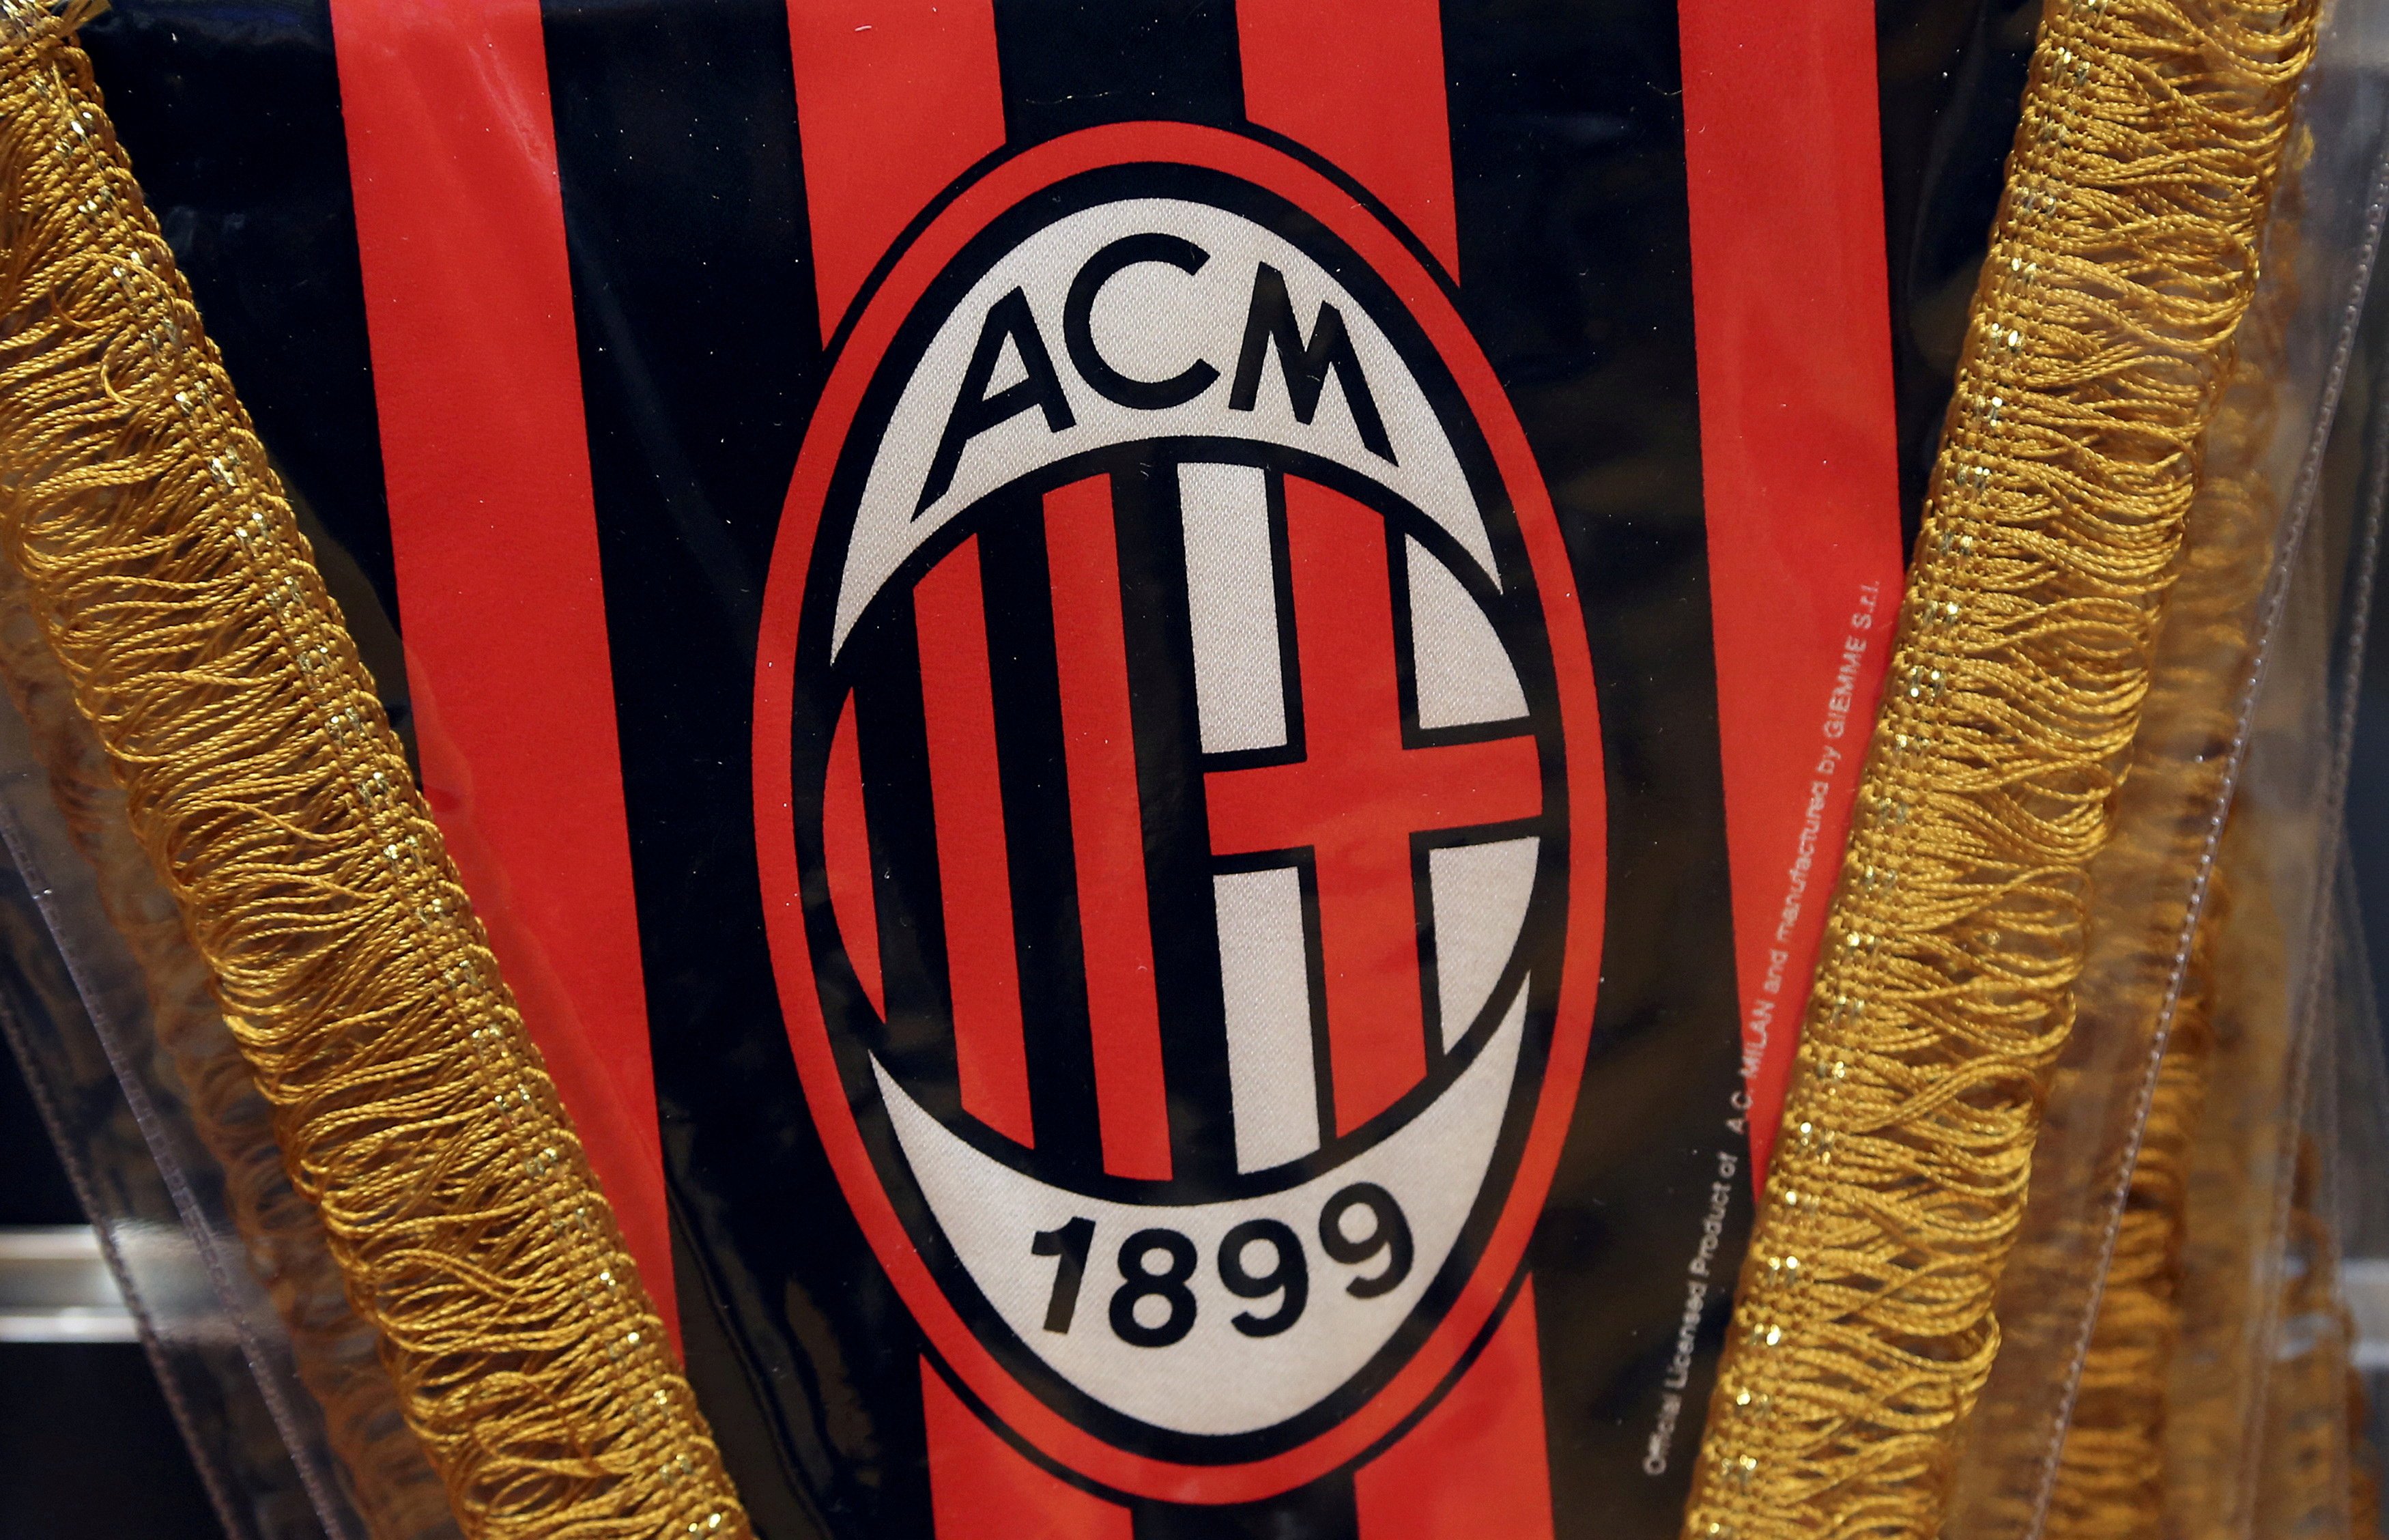 The AC Milan logo is pictured on a pennant in a soccer store in downtown Milan